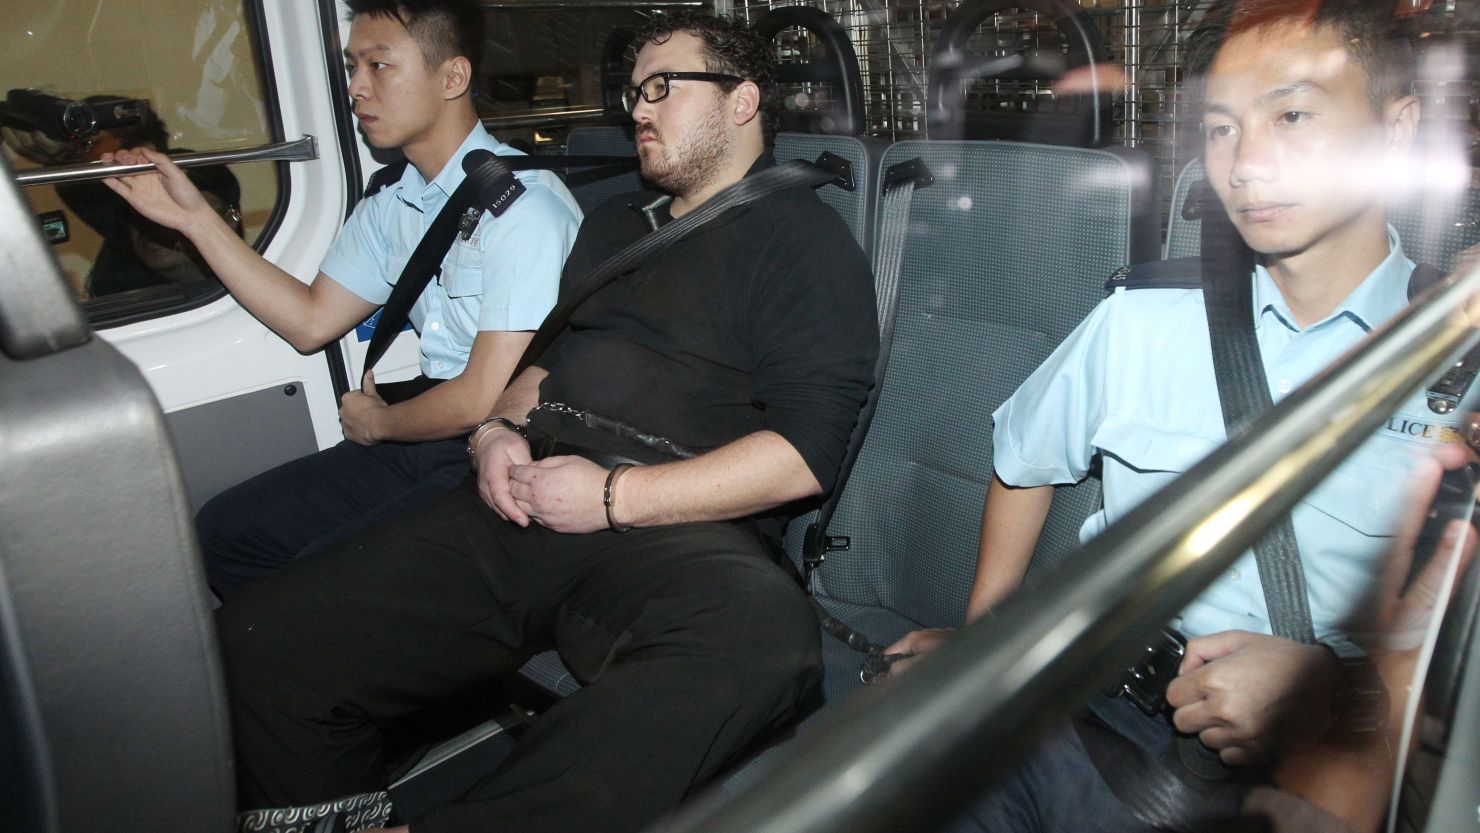 Murder suspect Rurik Jutting is driven to court by Hong Kong police on November 3, 2014.